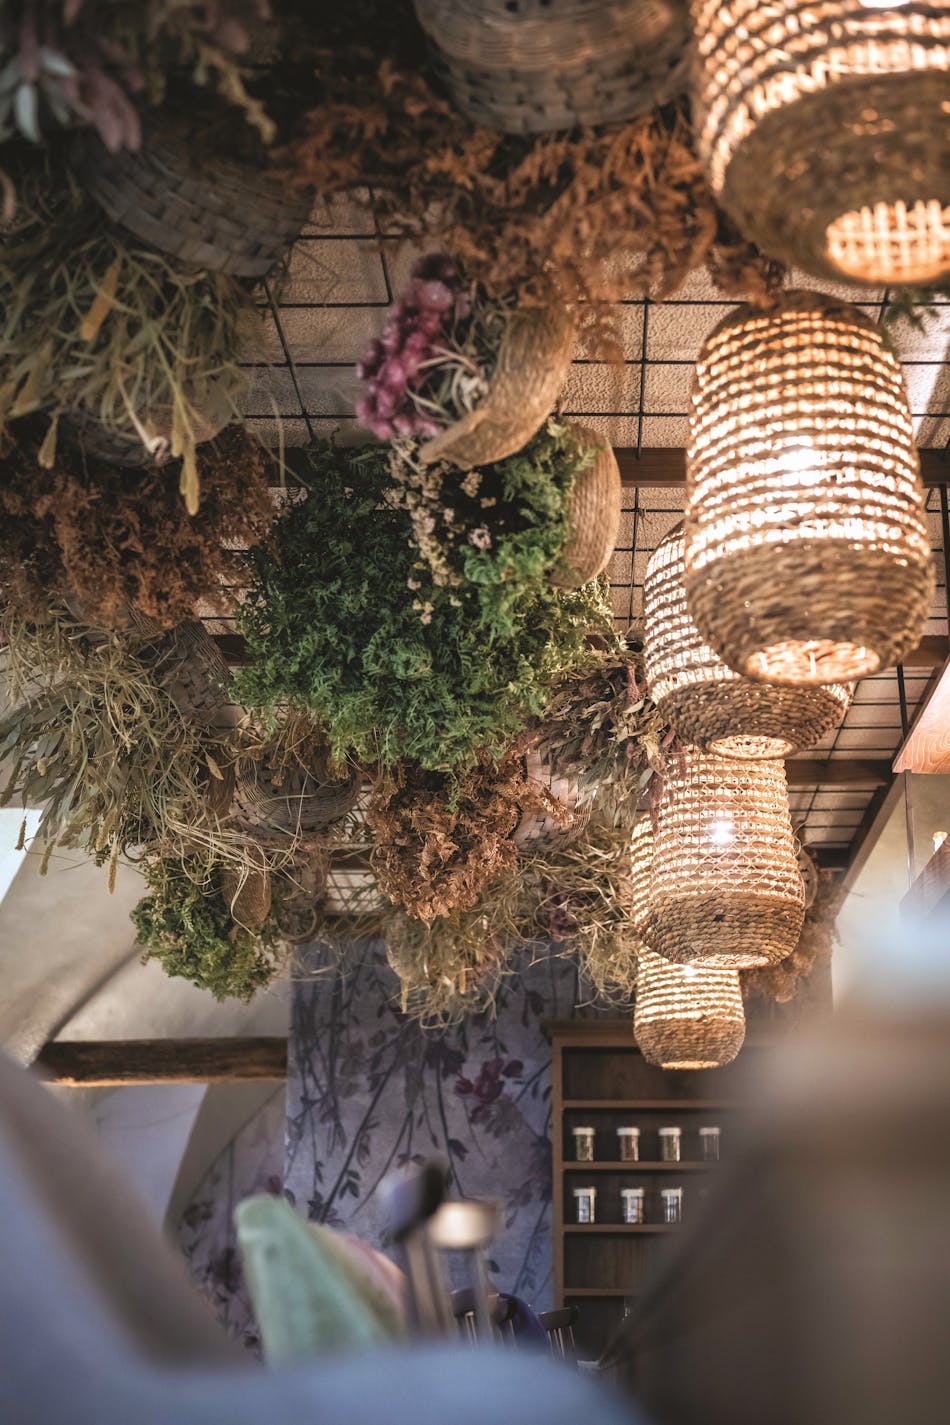 The ceiling of upturned flower baskets is further complemented with hanging rattan lamps.